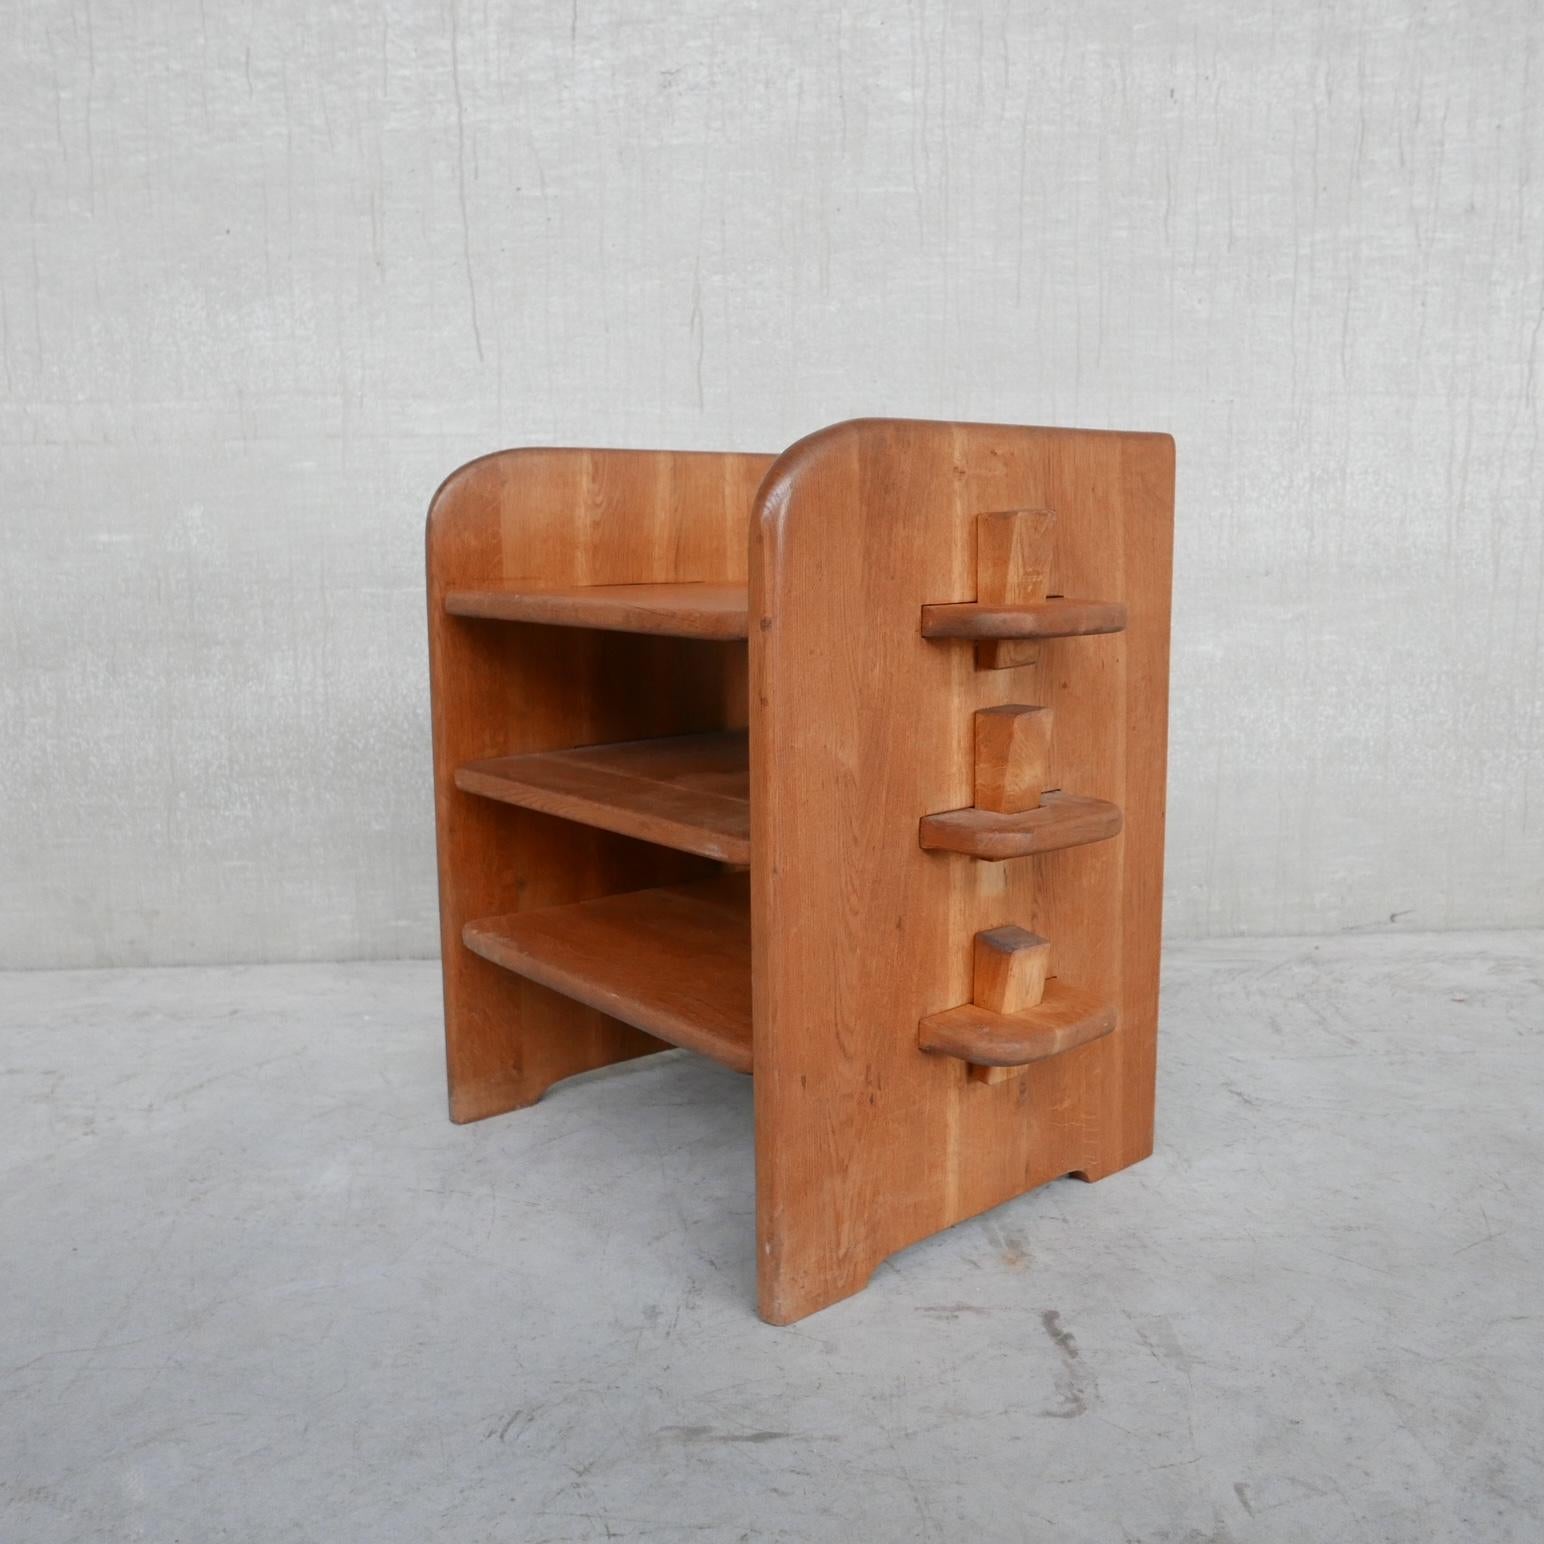 An oak mid-century shelving unit. 

Belgium, c1970s. 

Simple assembly with chunky pegs to each side. 

Folds down for transport. Good condition. 

Location: Belgium Gallery.

Dimensions: 74 W x 51 D x 72 total height in cm.

Delivery: